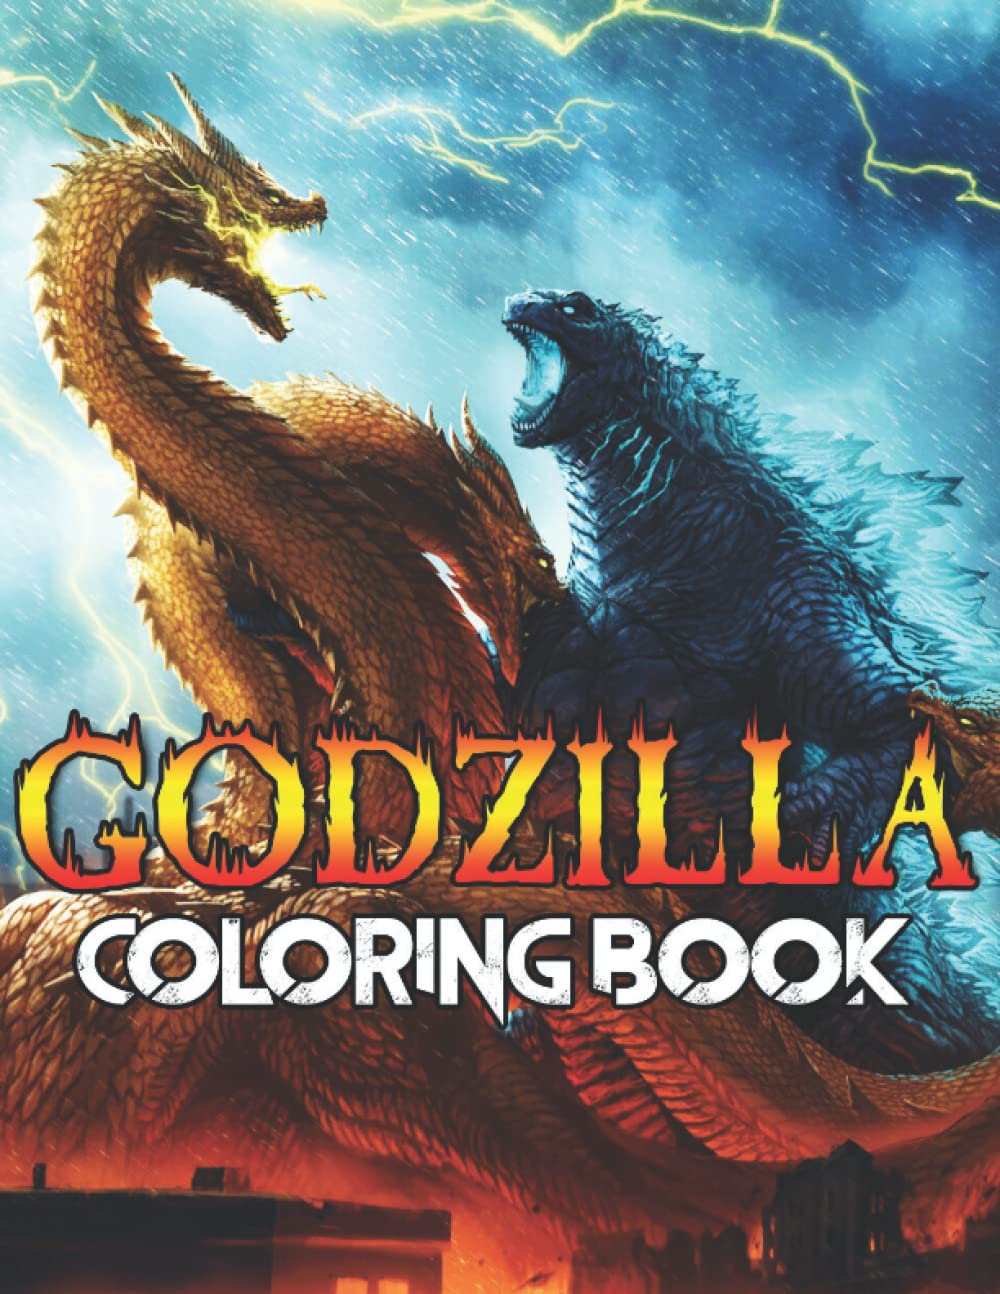 Godzilla coloring book godzilla monster coloring book designed for stress relieving and creativity by lorey publishing